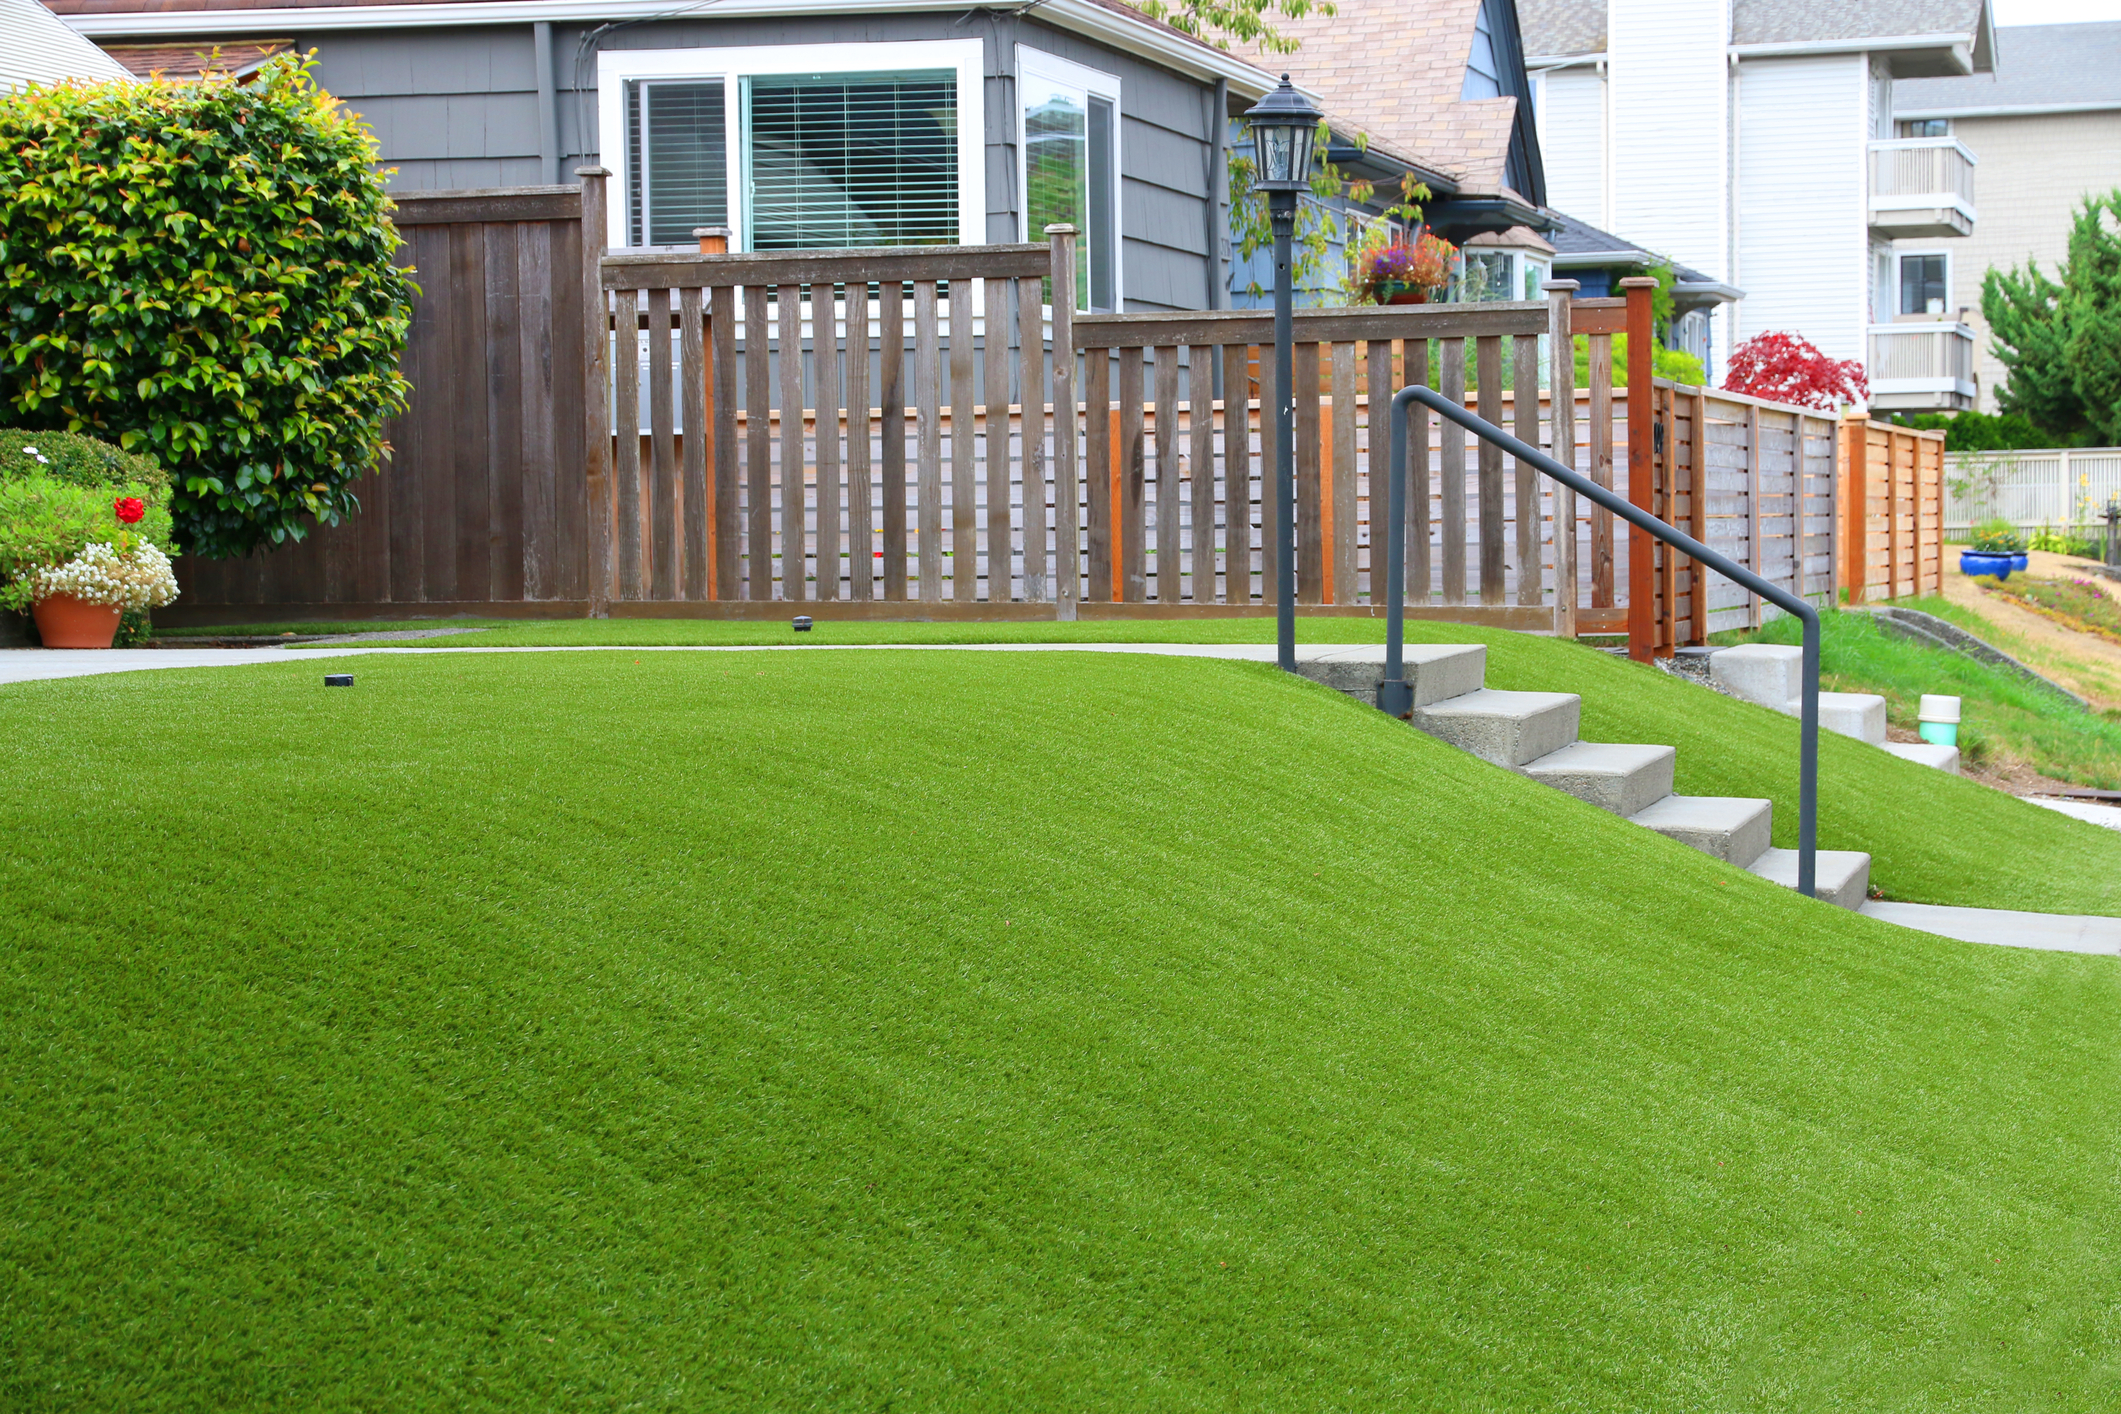 Artificial Grass installations in Coquitlam and Port Moody